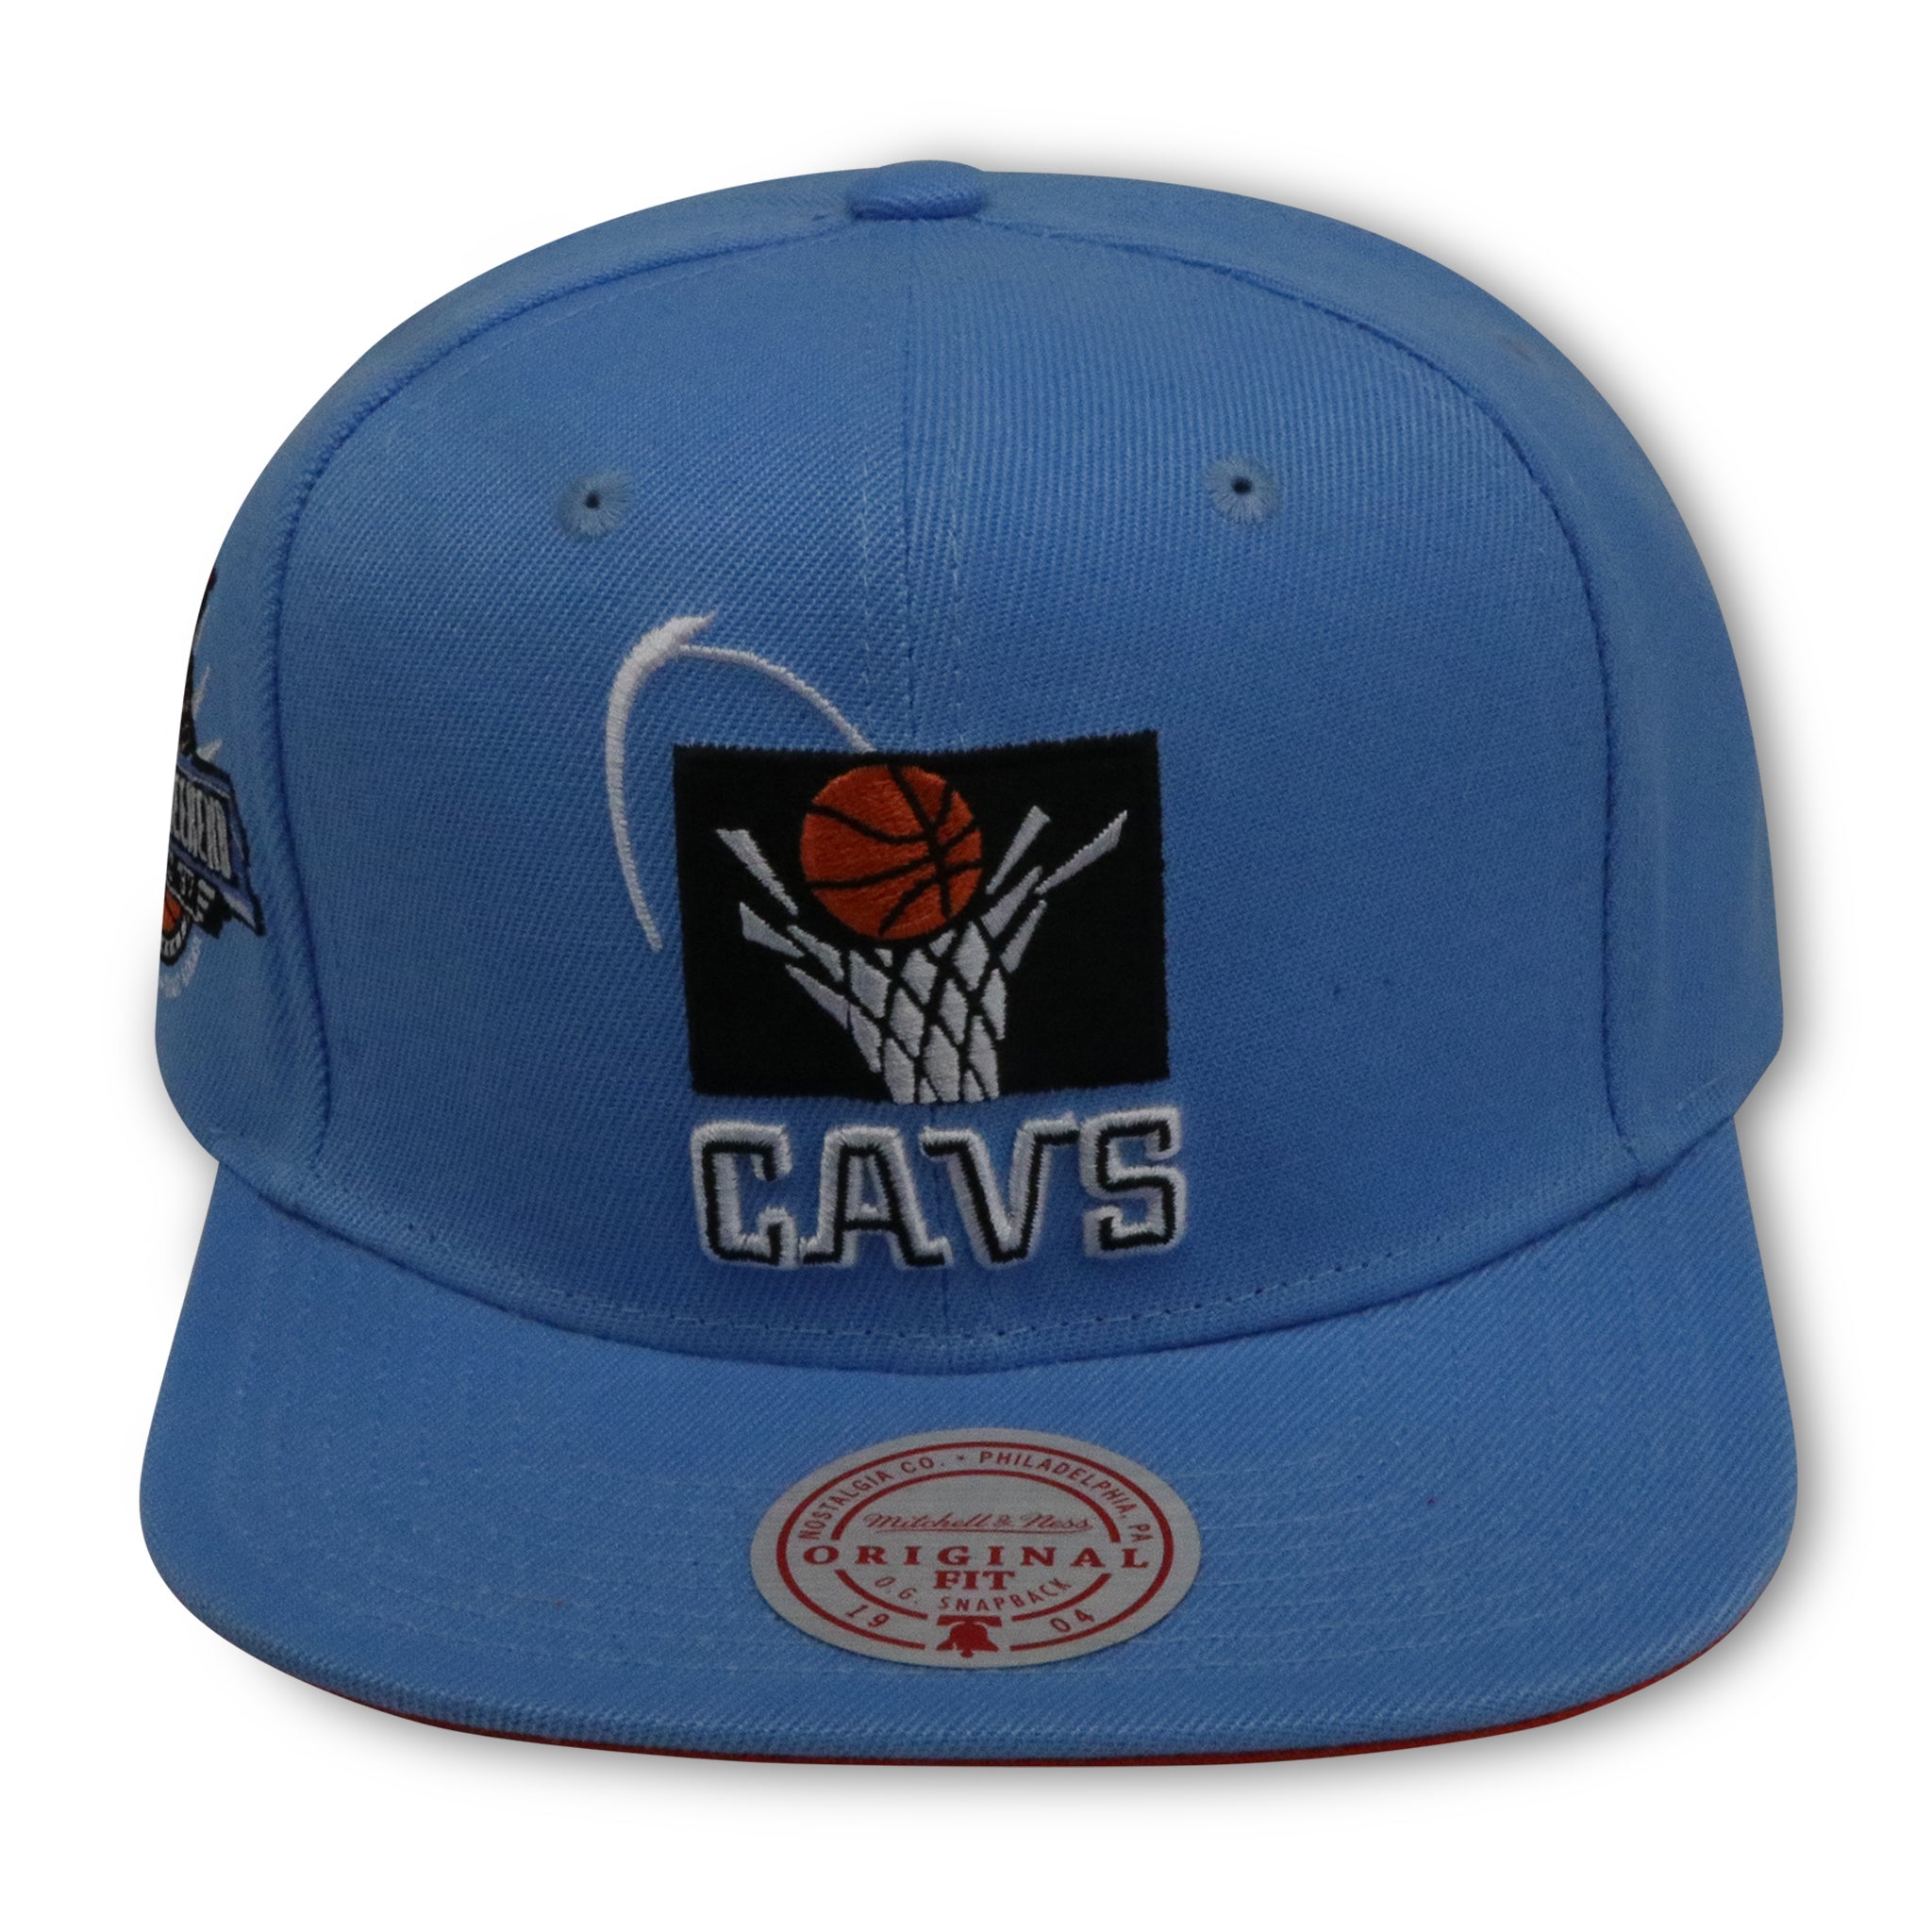 CLEVELAND CAVALIERS (SKYBLUE) (1997 ALLSTARGAME WEEKEND) MITCHELL & NESS (SH21475)